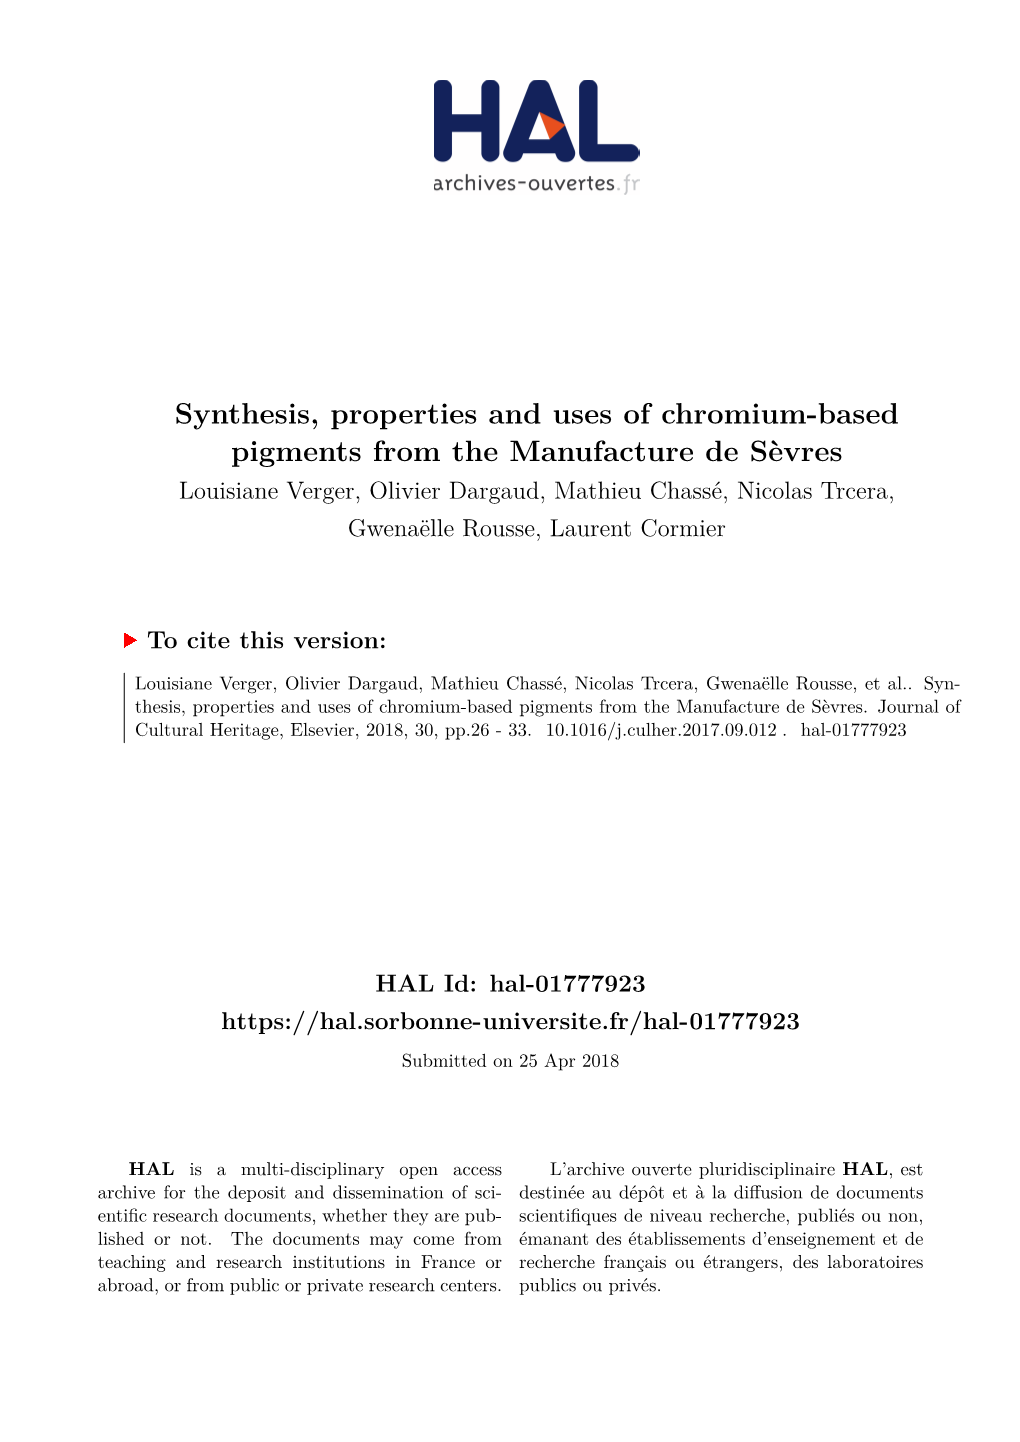 Synthesis, Properties and Uses of Chromium-Based Pigments from The